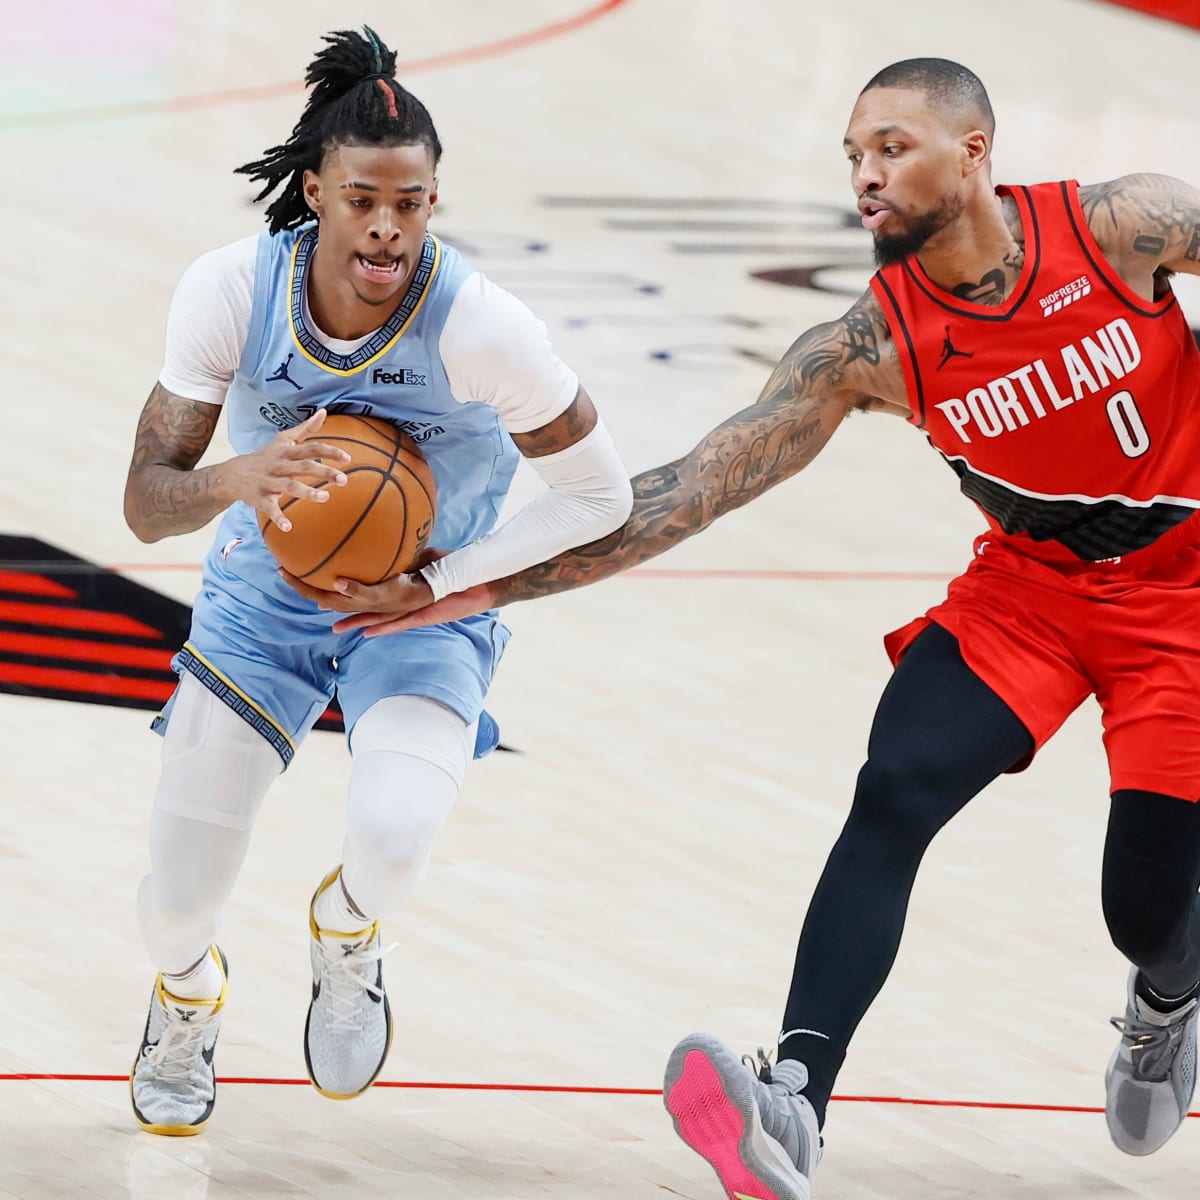 Ja Morant and Damian Lillard played a crazy game of poker